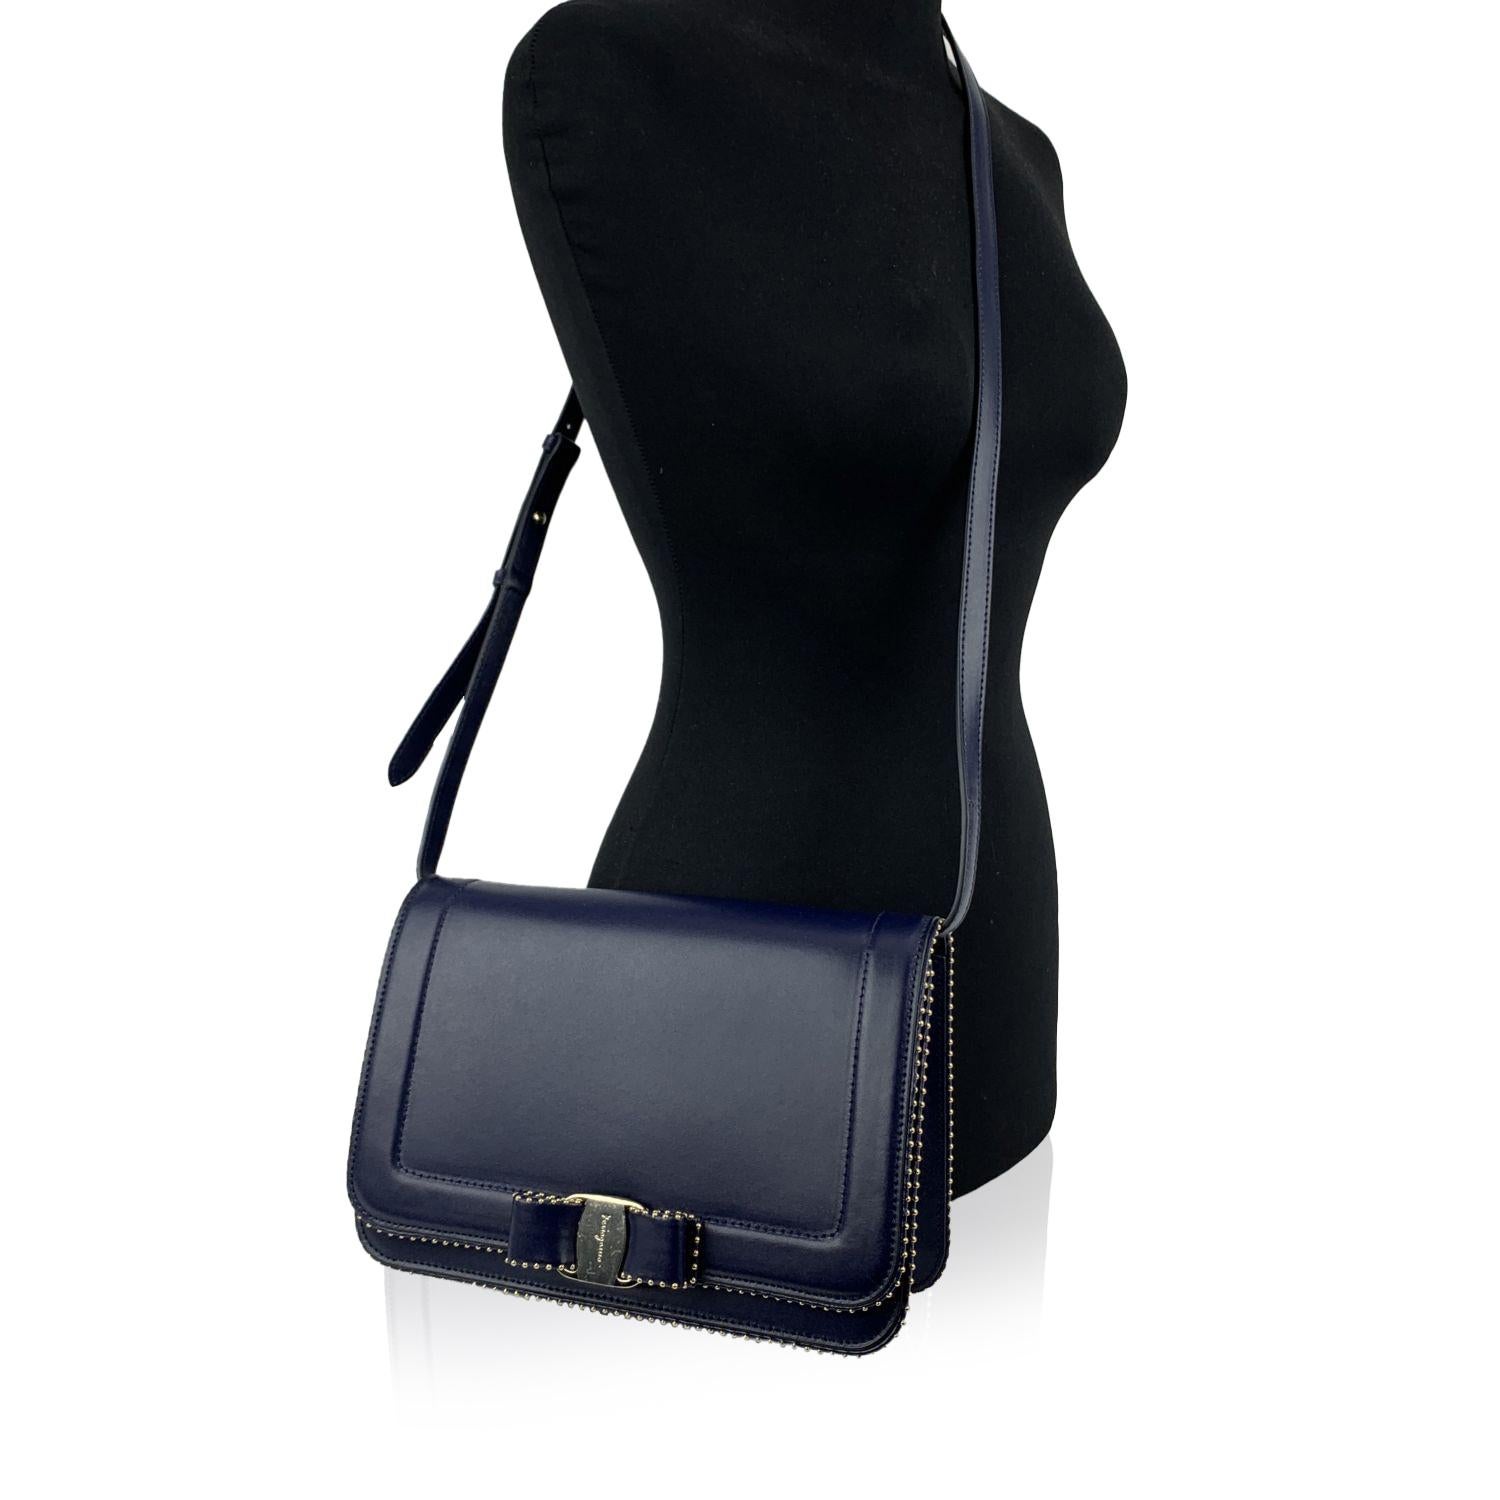 Beautiful 'Vara RW O' shoulder bag by Salvatore Ferragamo. Made of blue calf leather. It features a flap closure with iconic Vara Bow detailing on the front and gold metal micro-studs detailing around the edges of the bag. Adjustable shoulder strap.